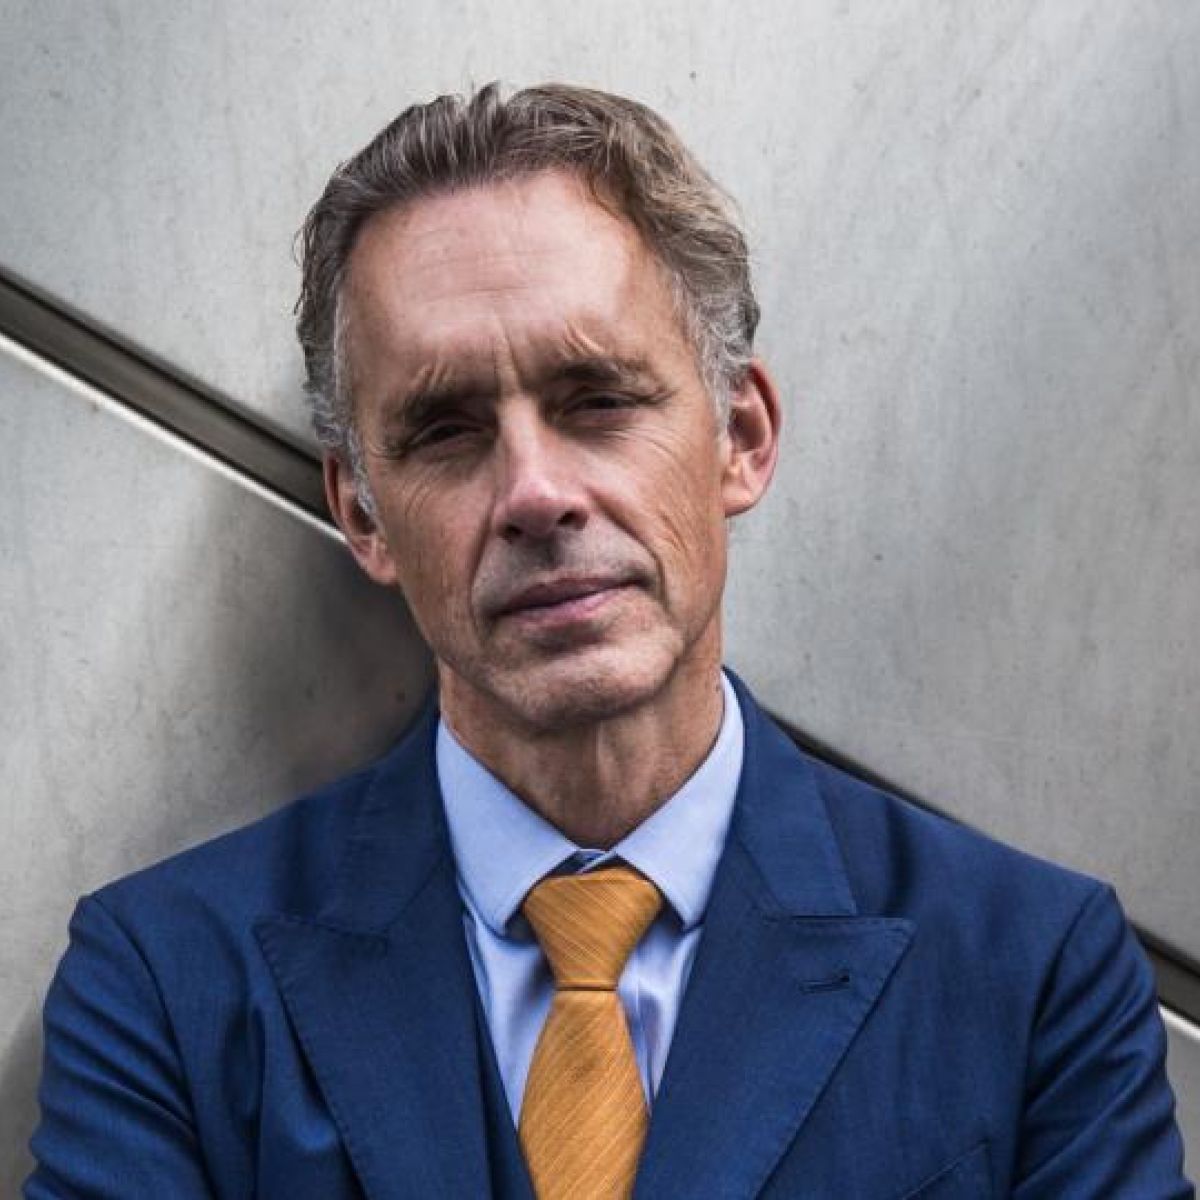 Preference uddannelse Pengeudlån Jordan Peterson: 'What the hell's wrong with self-help books?'